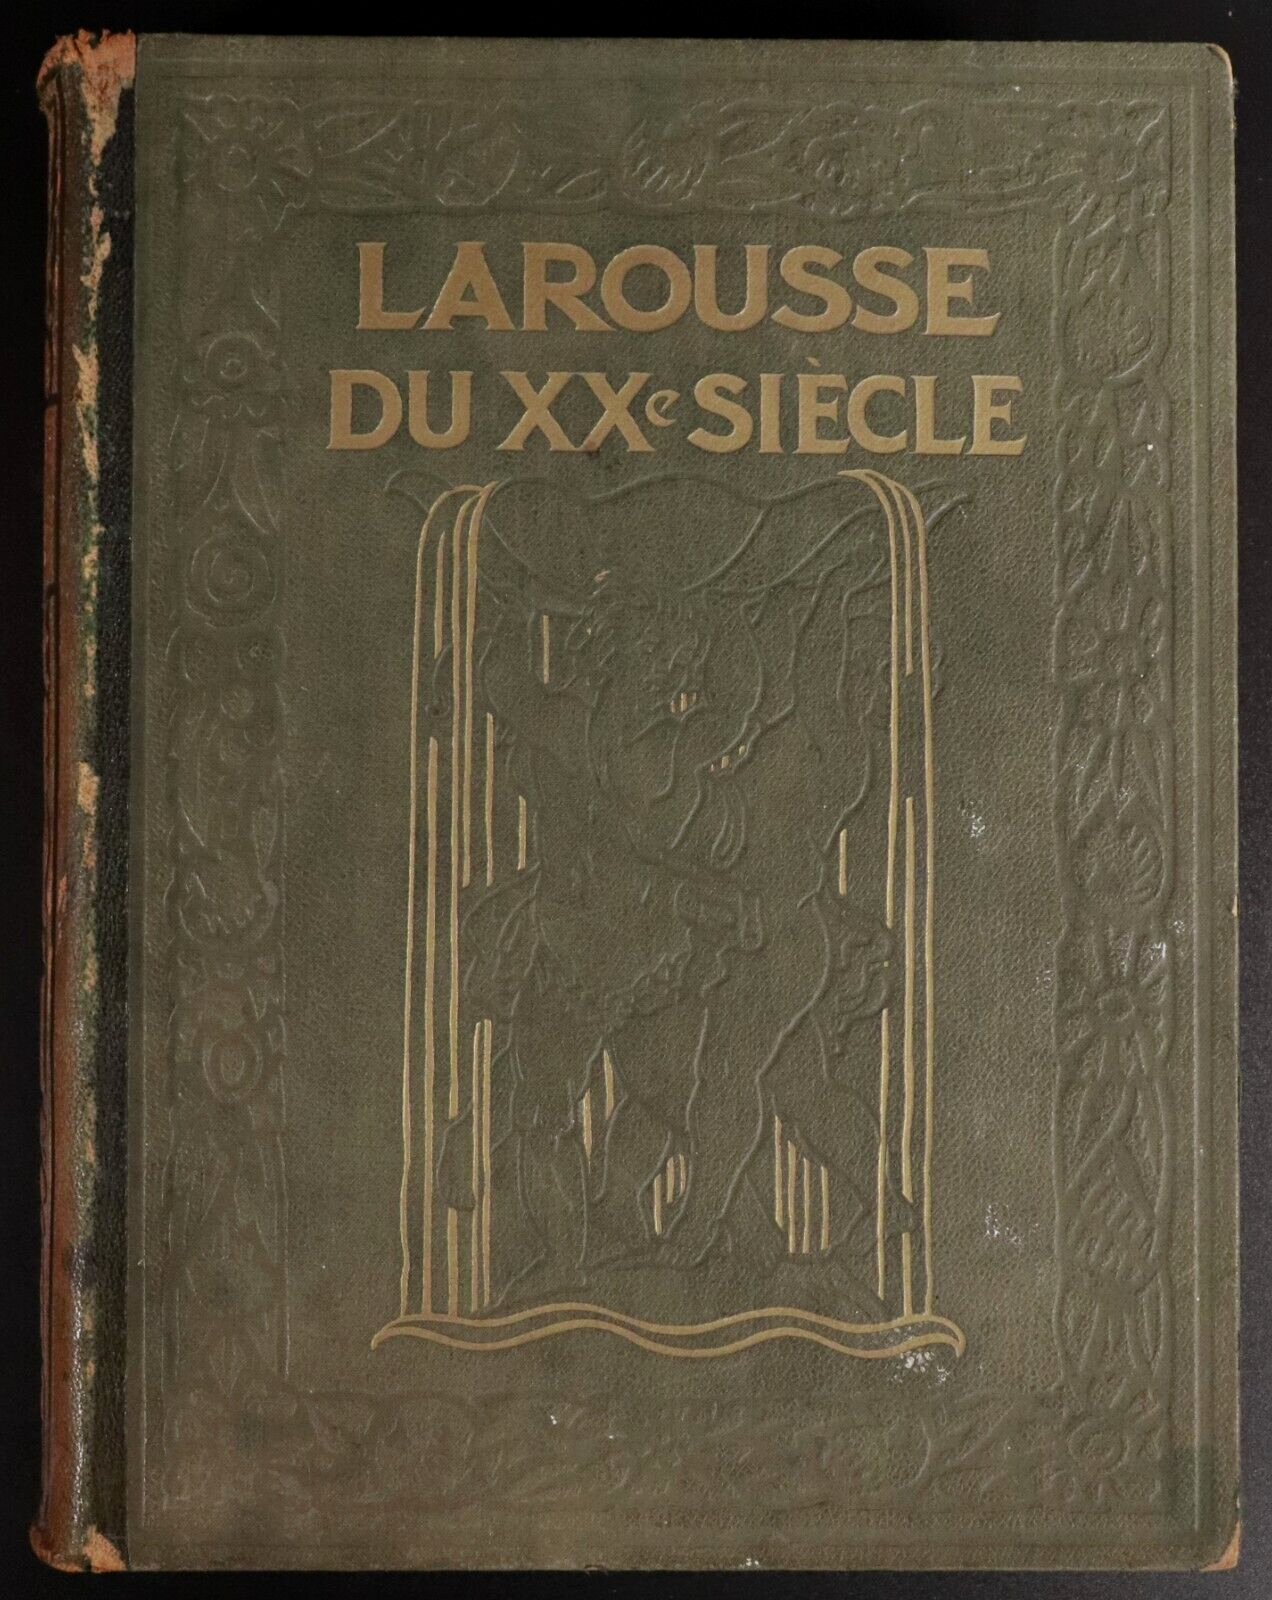 1933 Larousse Du Xxe Siecle Vol.3 by Paul Auge' French Reference Book